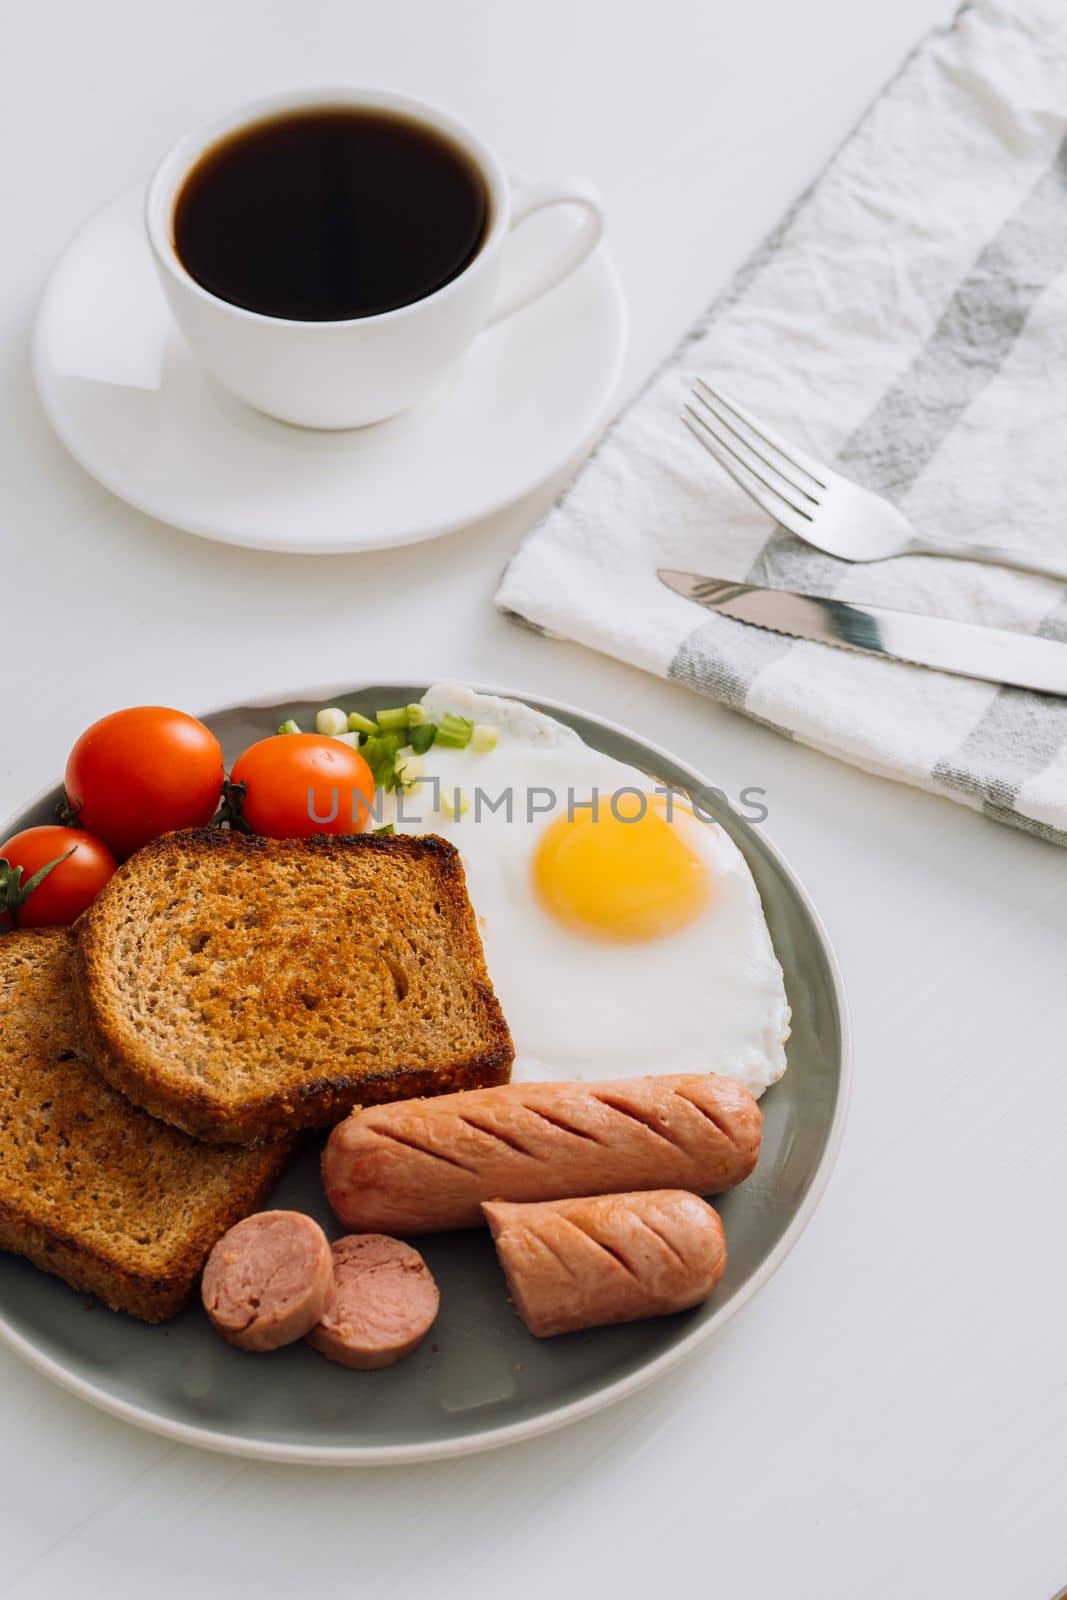 Breakfast plate with cup of black coffee, grilled sausage and whole wheat toast with fried egg and cherry tomatoes on a plate by Romvy